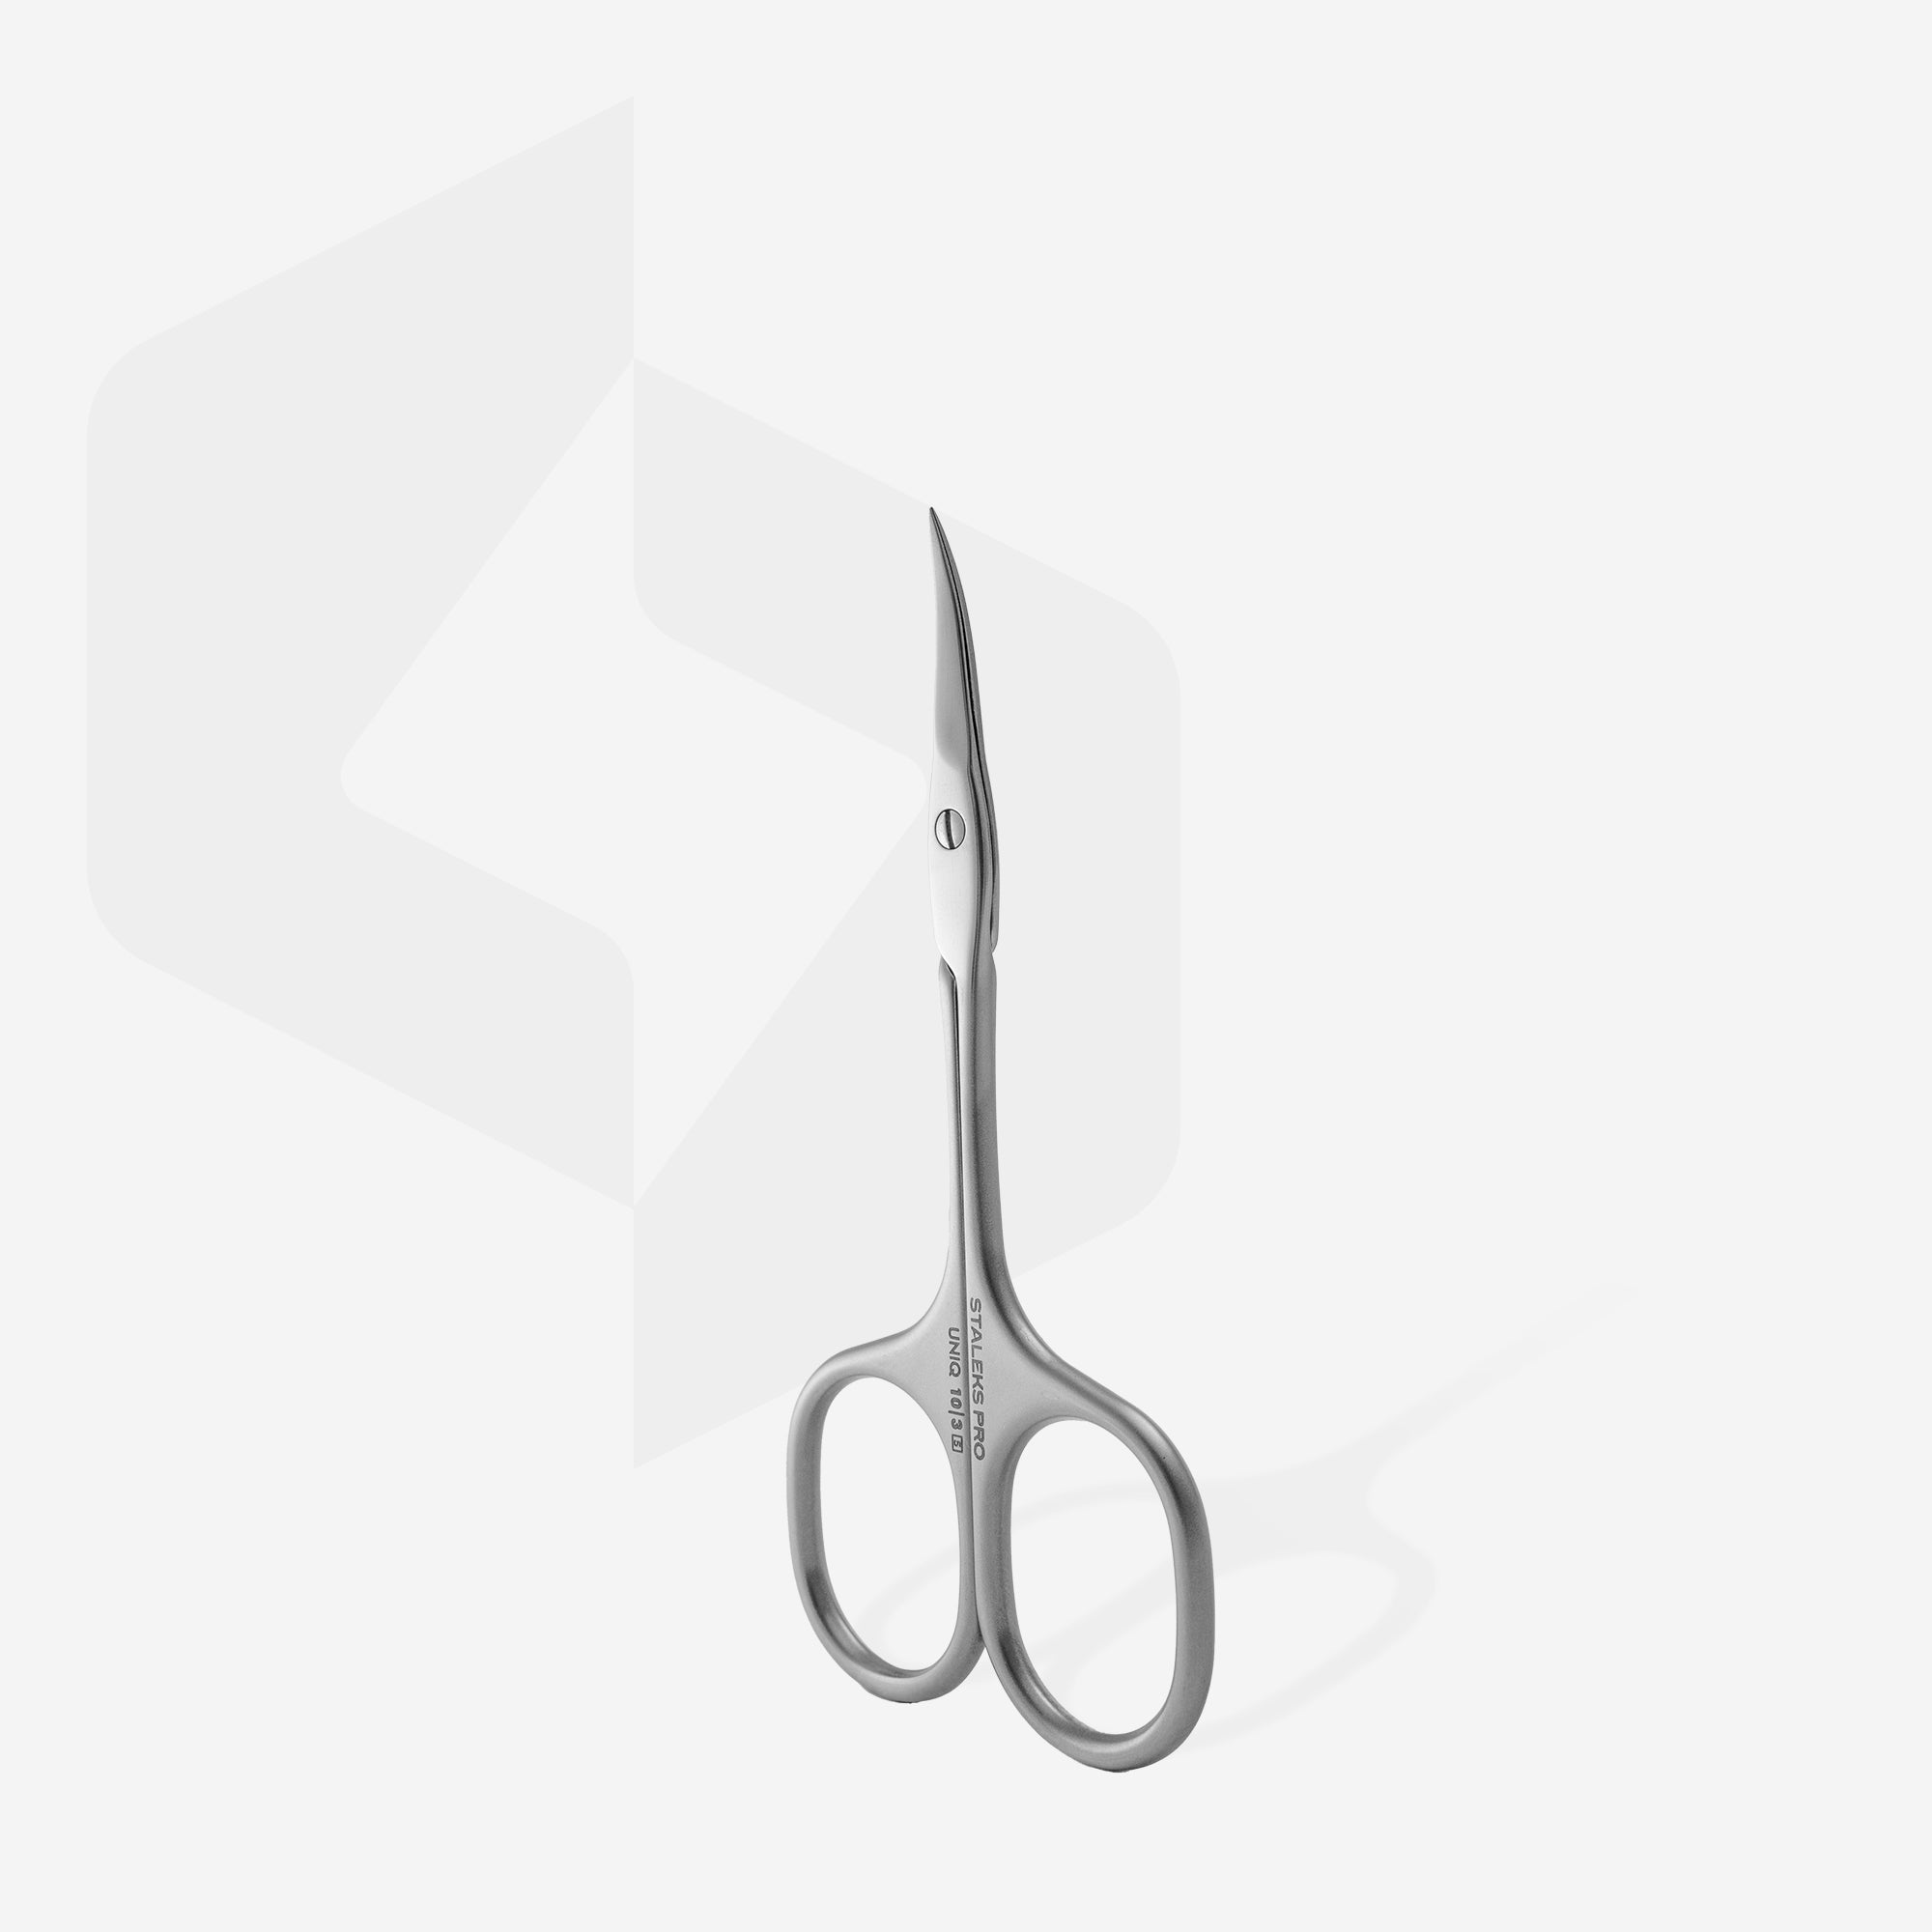 Professional Stainless Steel Nail Scissors Cutting False Nails